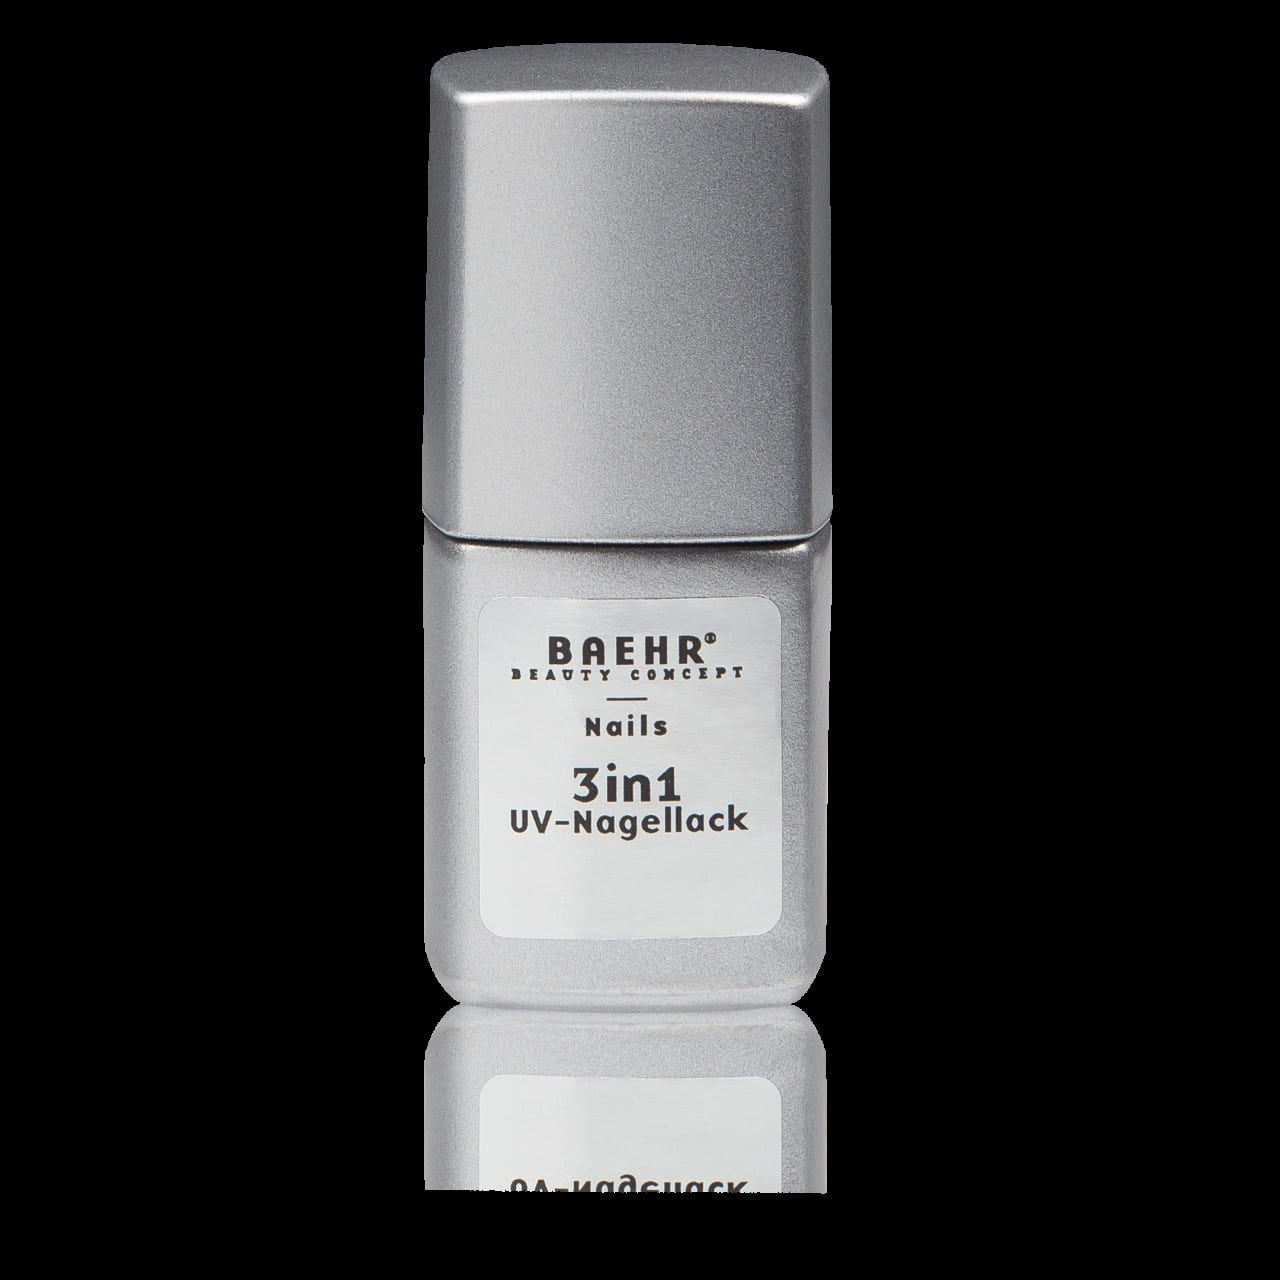 beahr-beauty-concept-3in1-uv-nagellack-candy-mint-softpastell12-ml